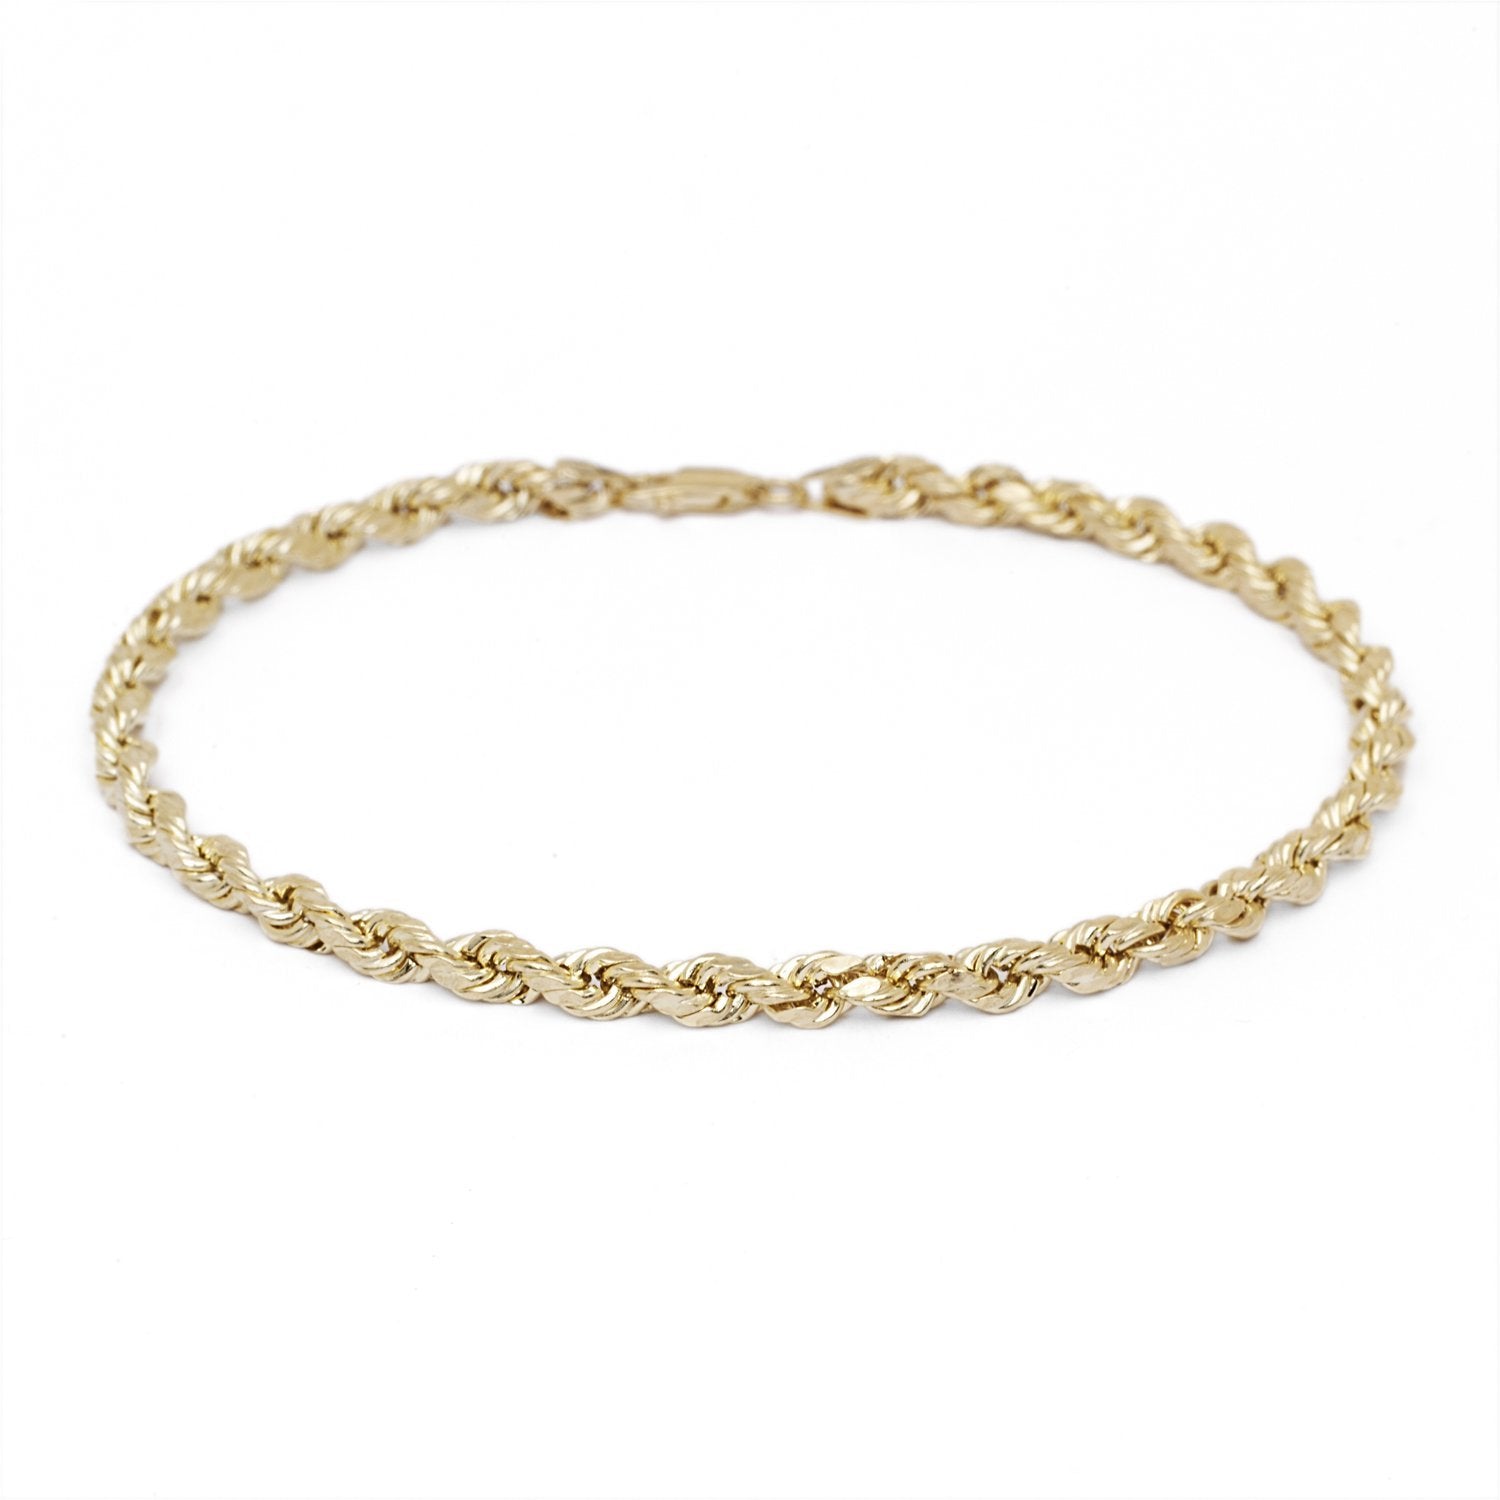 10k Yellow Gold Solid Diamond Cut Rope Chain Bracelet and Anklet, 0.12 Inch